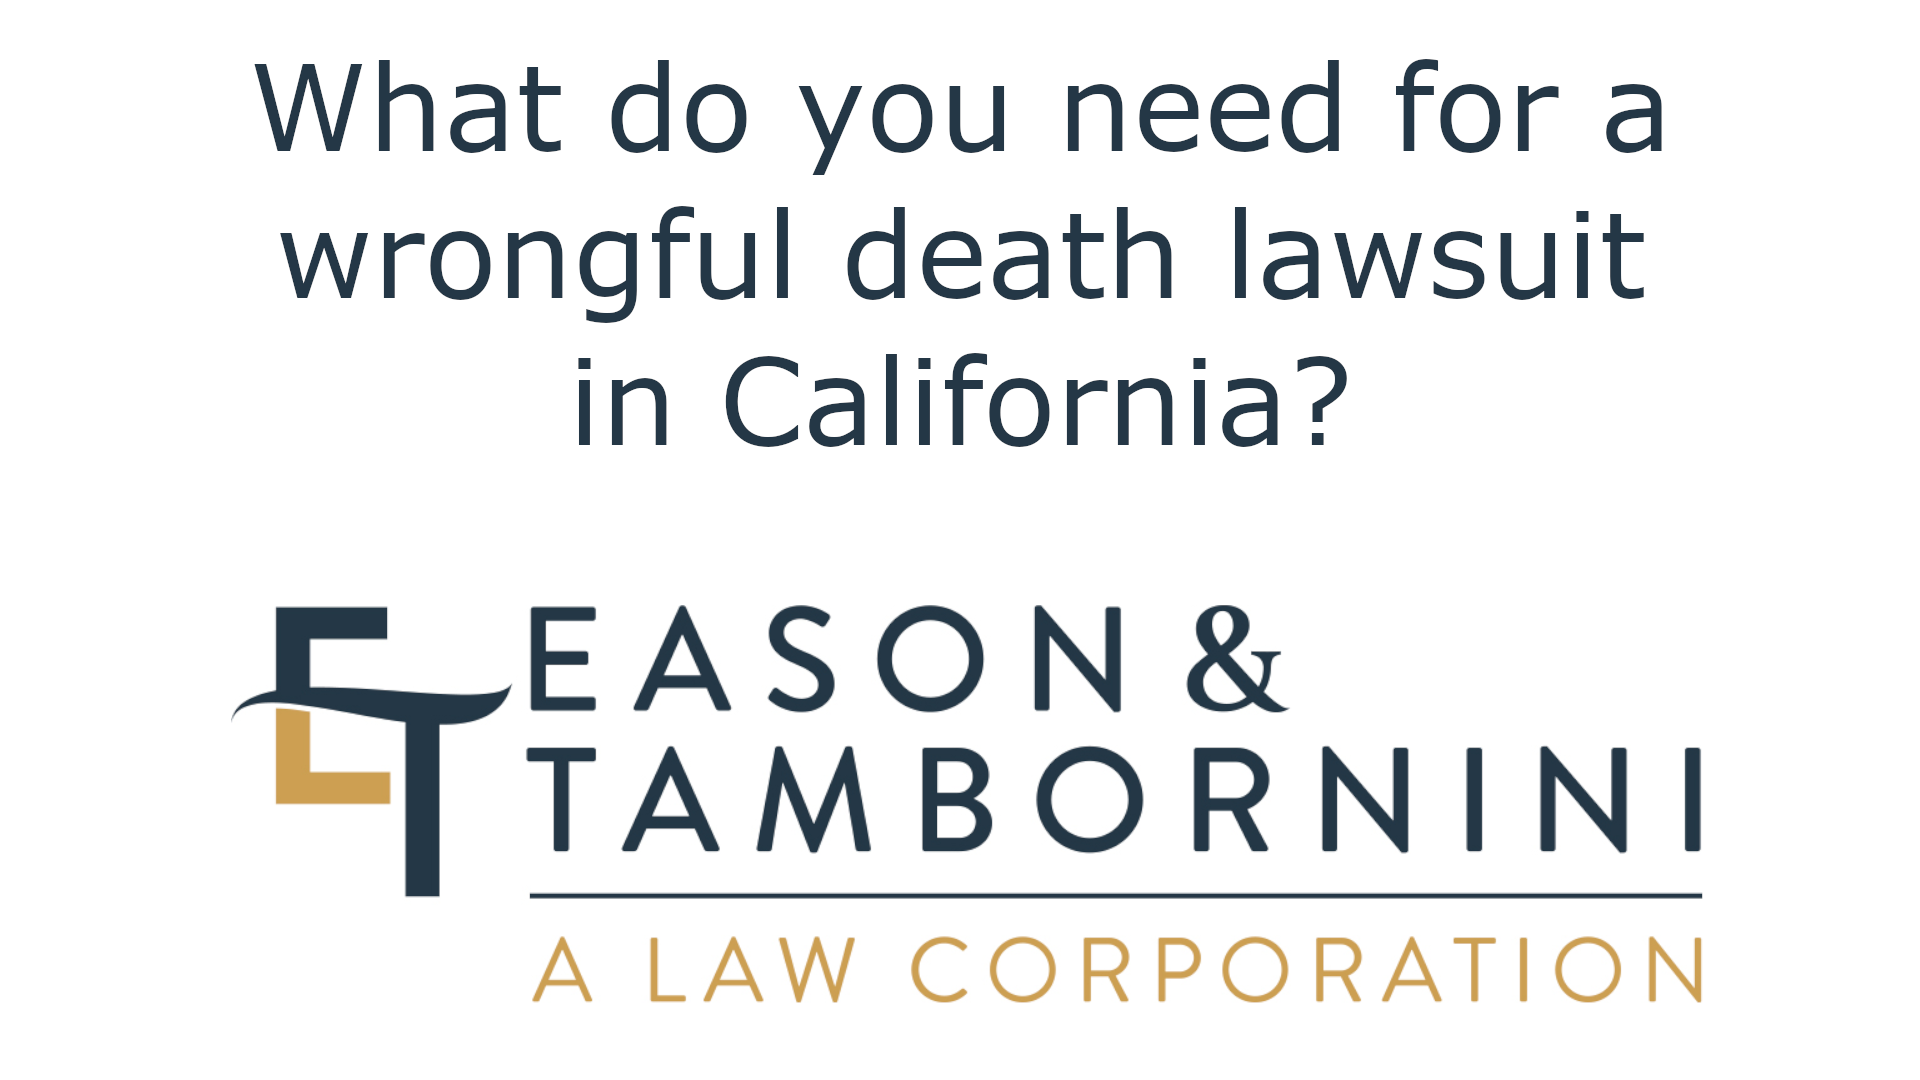 What do you need for a wrongful death lawsuit in California?